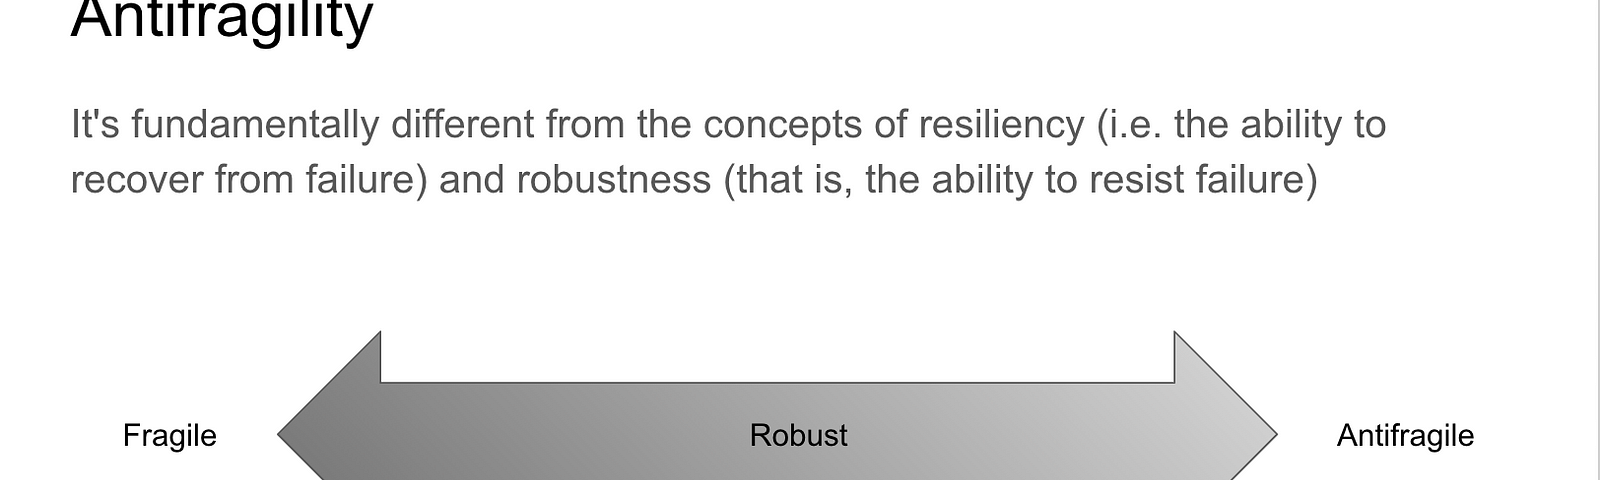 In the slide it's written: "Antifragility is fundamentally different from the concepts of resiliency (i.e. the ability to recover from failure) and robustness (that is, the ability to resist failure)"